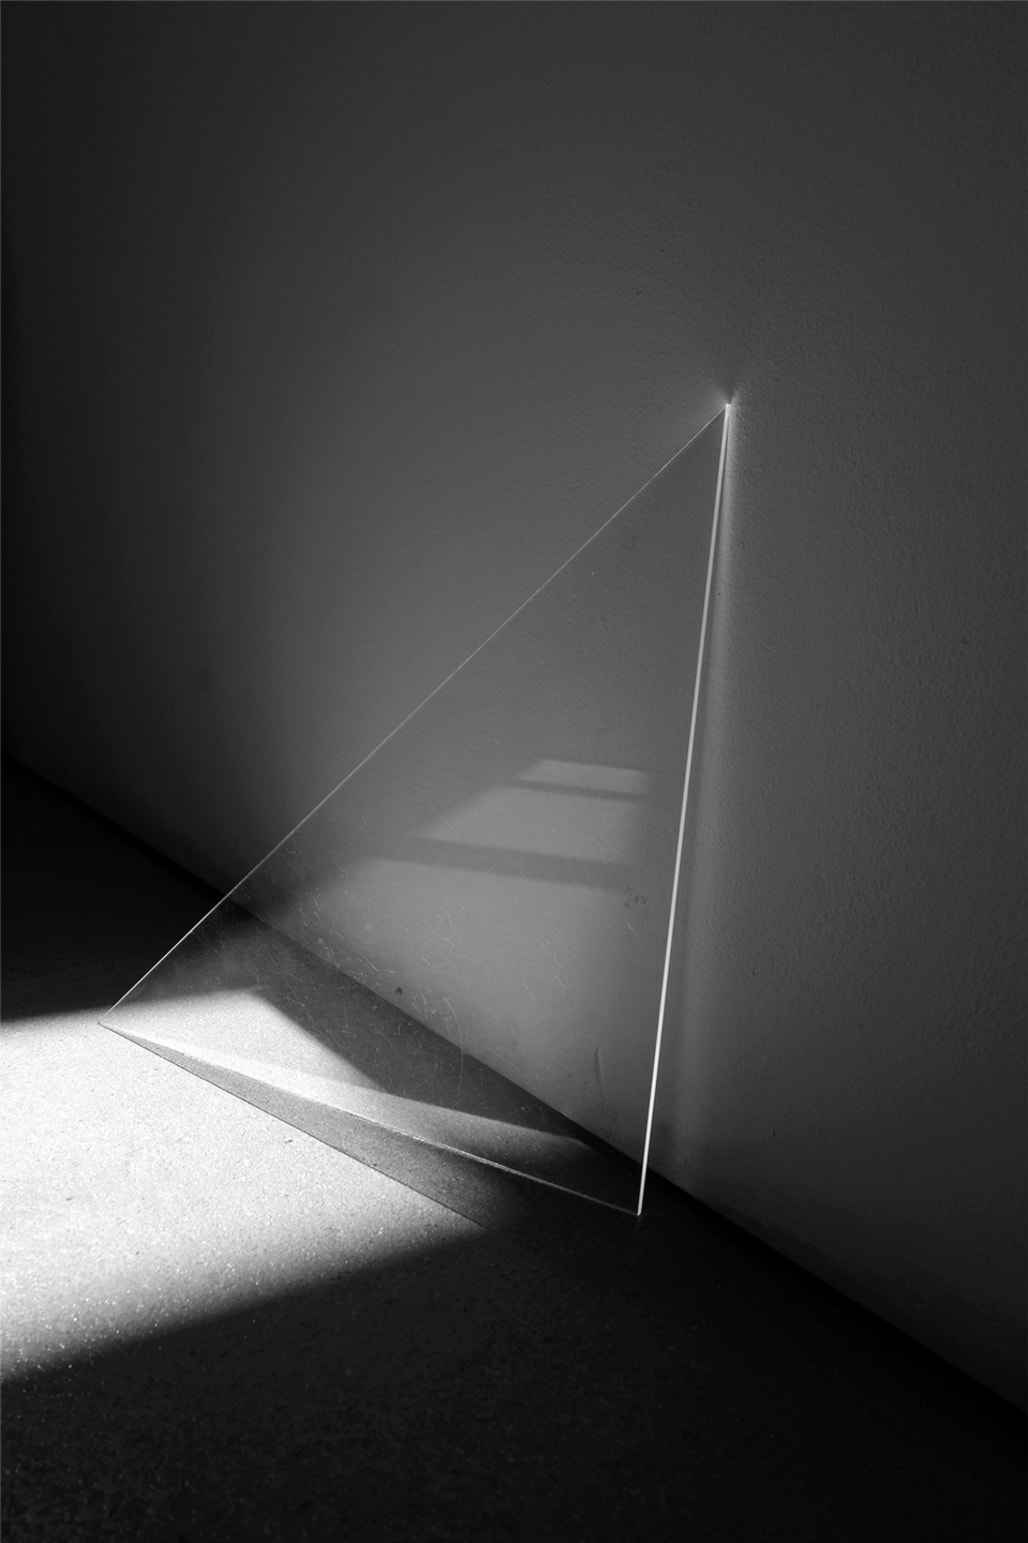 Acrylic triangle placed on the floor, leaning against a while wall. Sun light projects its highlights and shadows